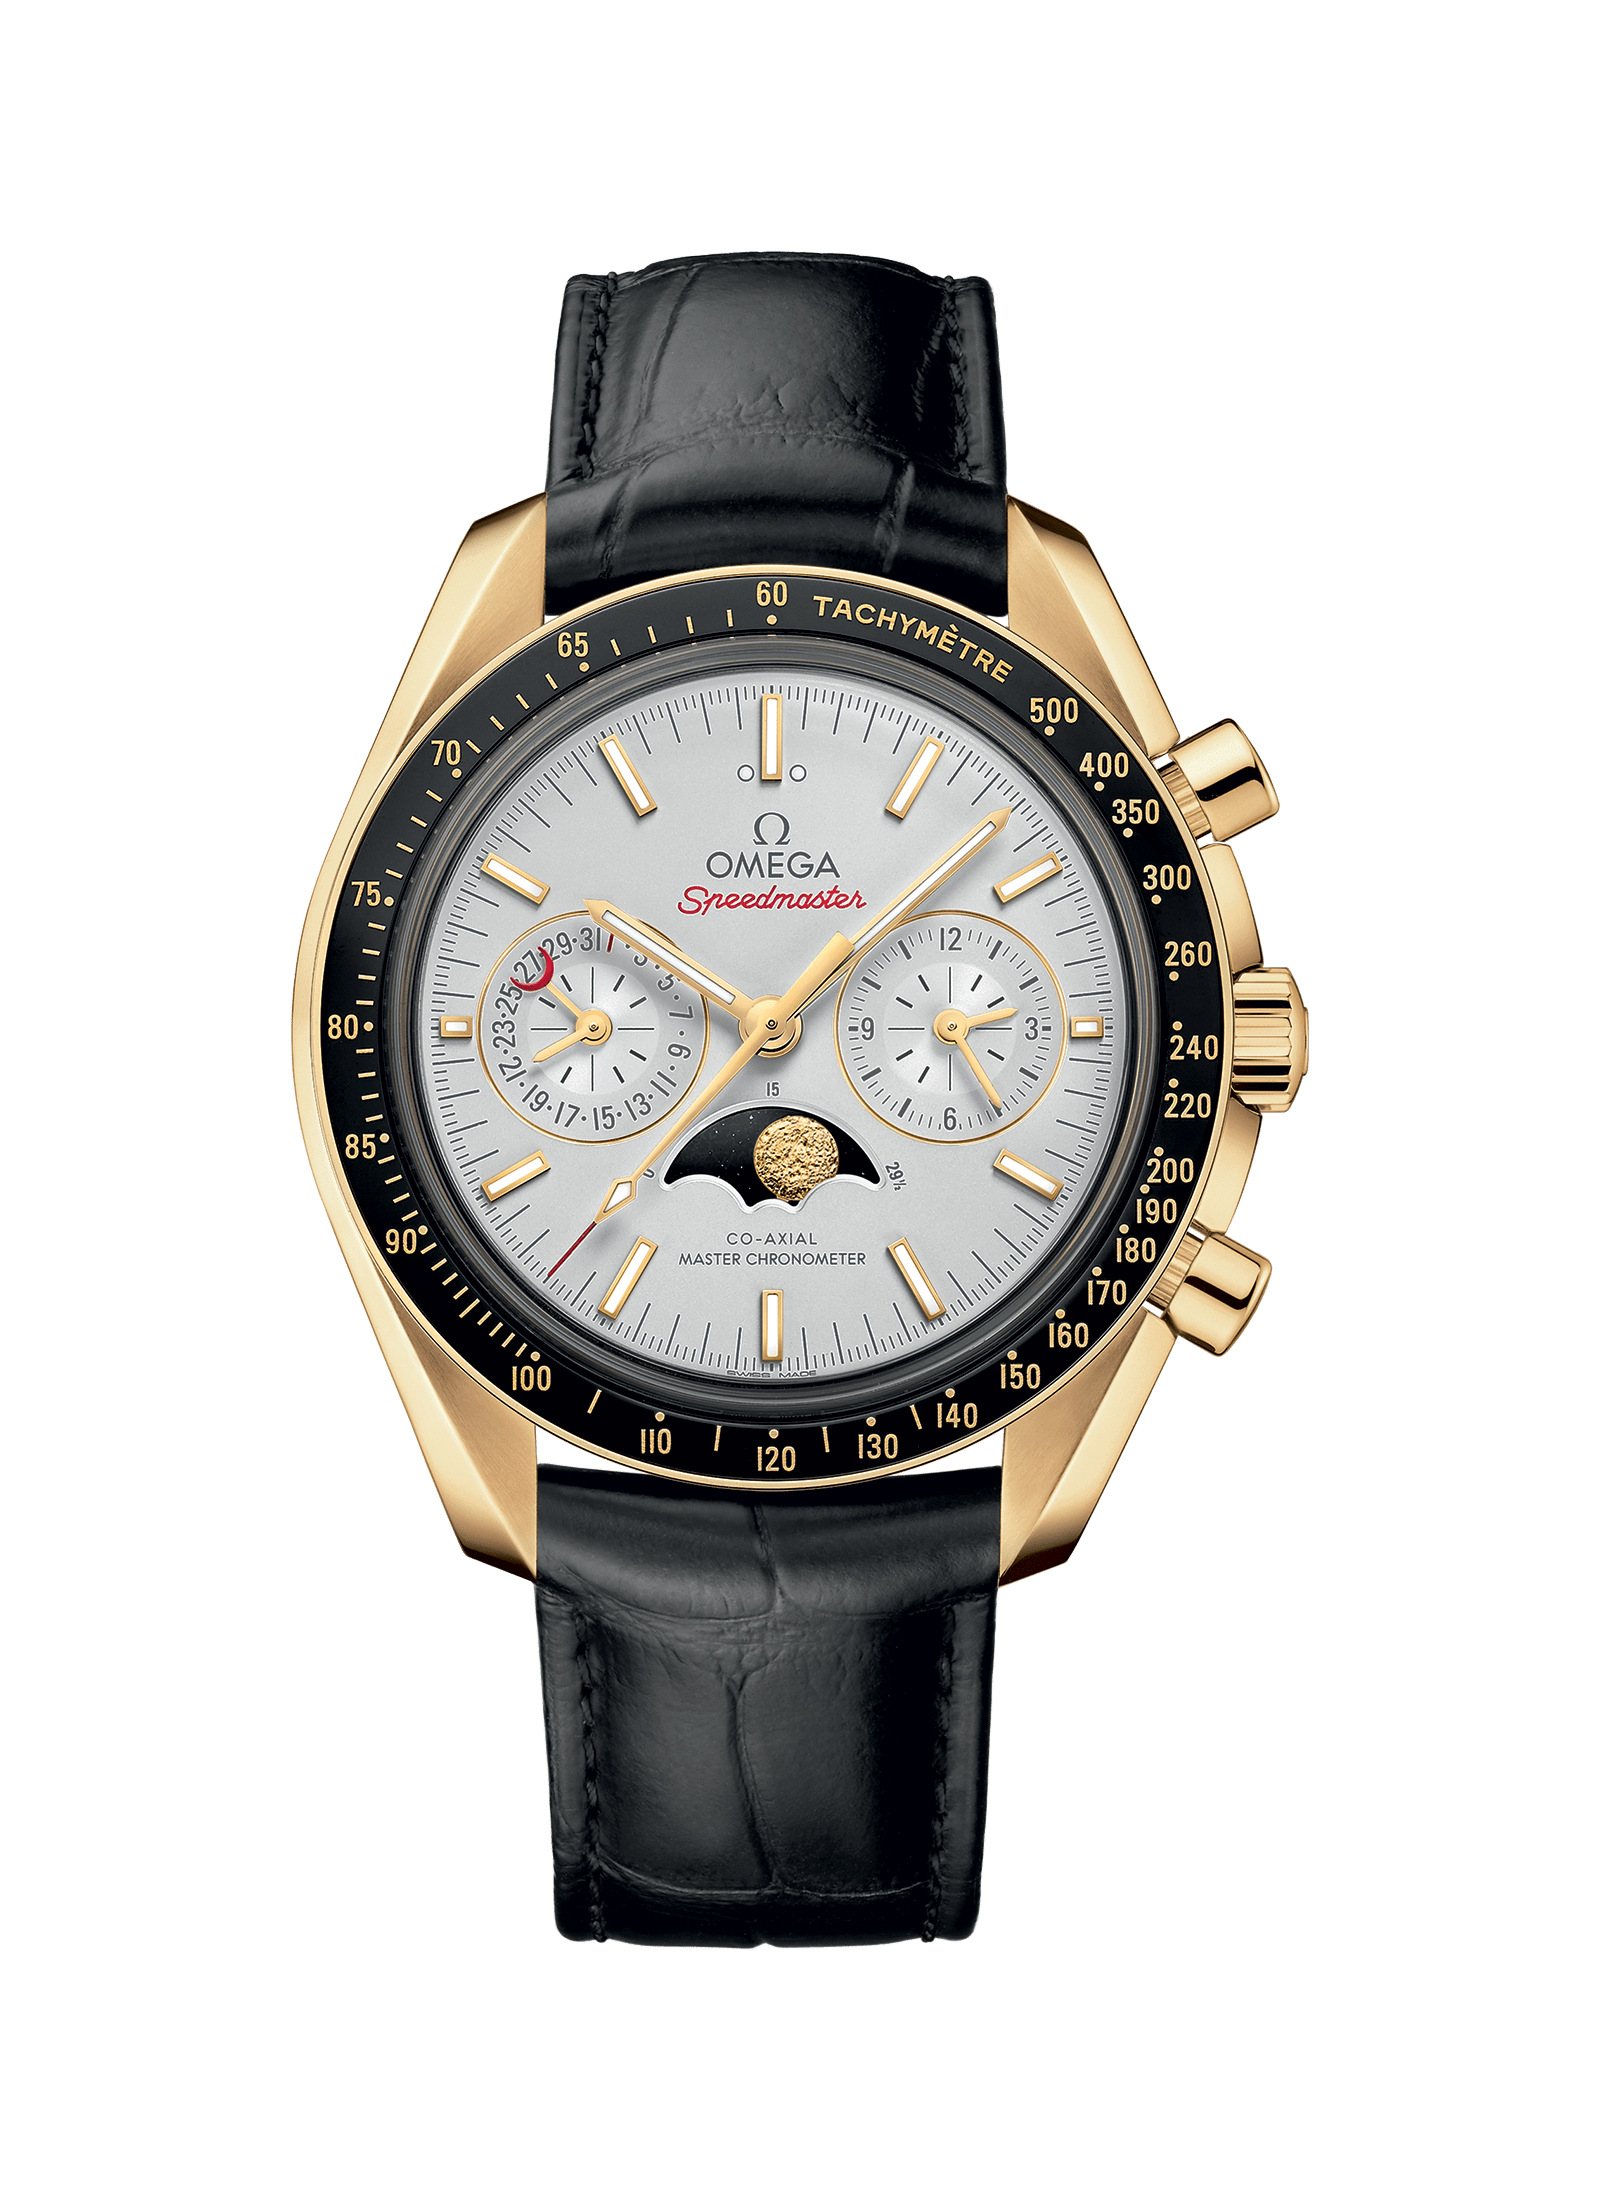 Men's watch / unisex  OMEGA, Speedmaster Moonphase Co Axial Master Chronometer Chronograph / 44.25mm, SKU: 304.63.44.52.02.001 | watchapproach.com